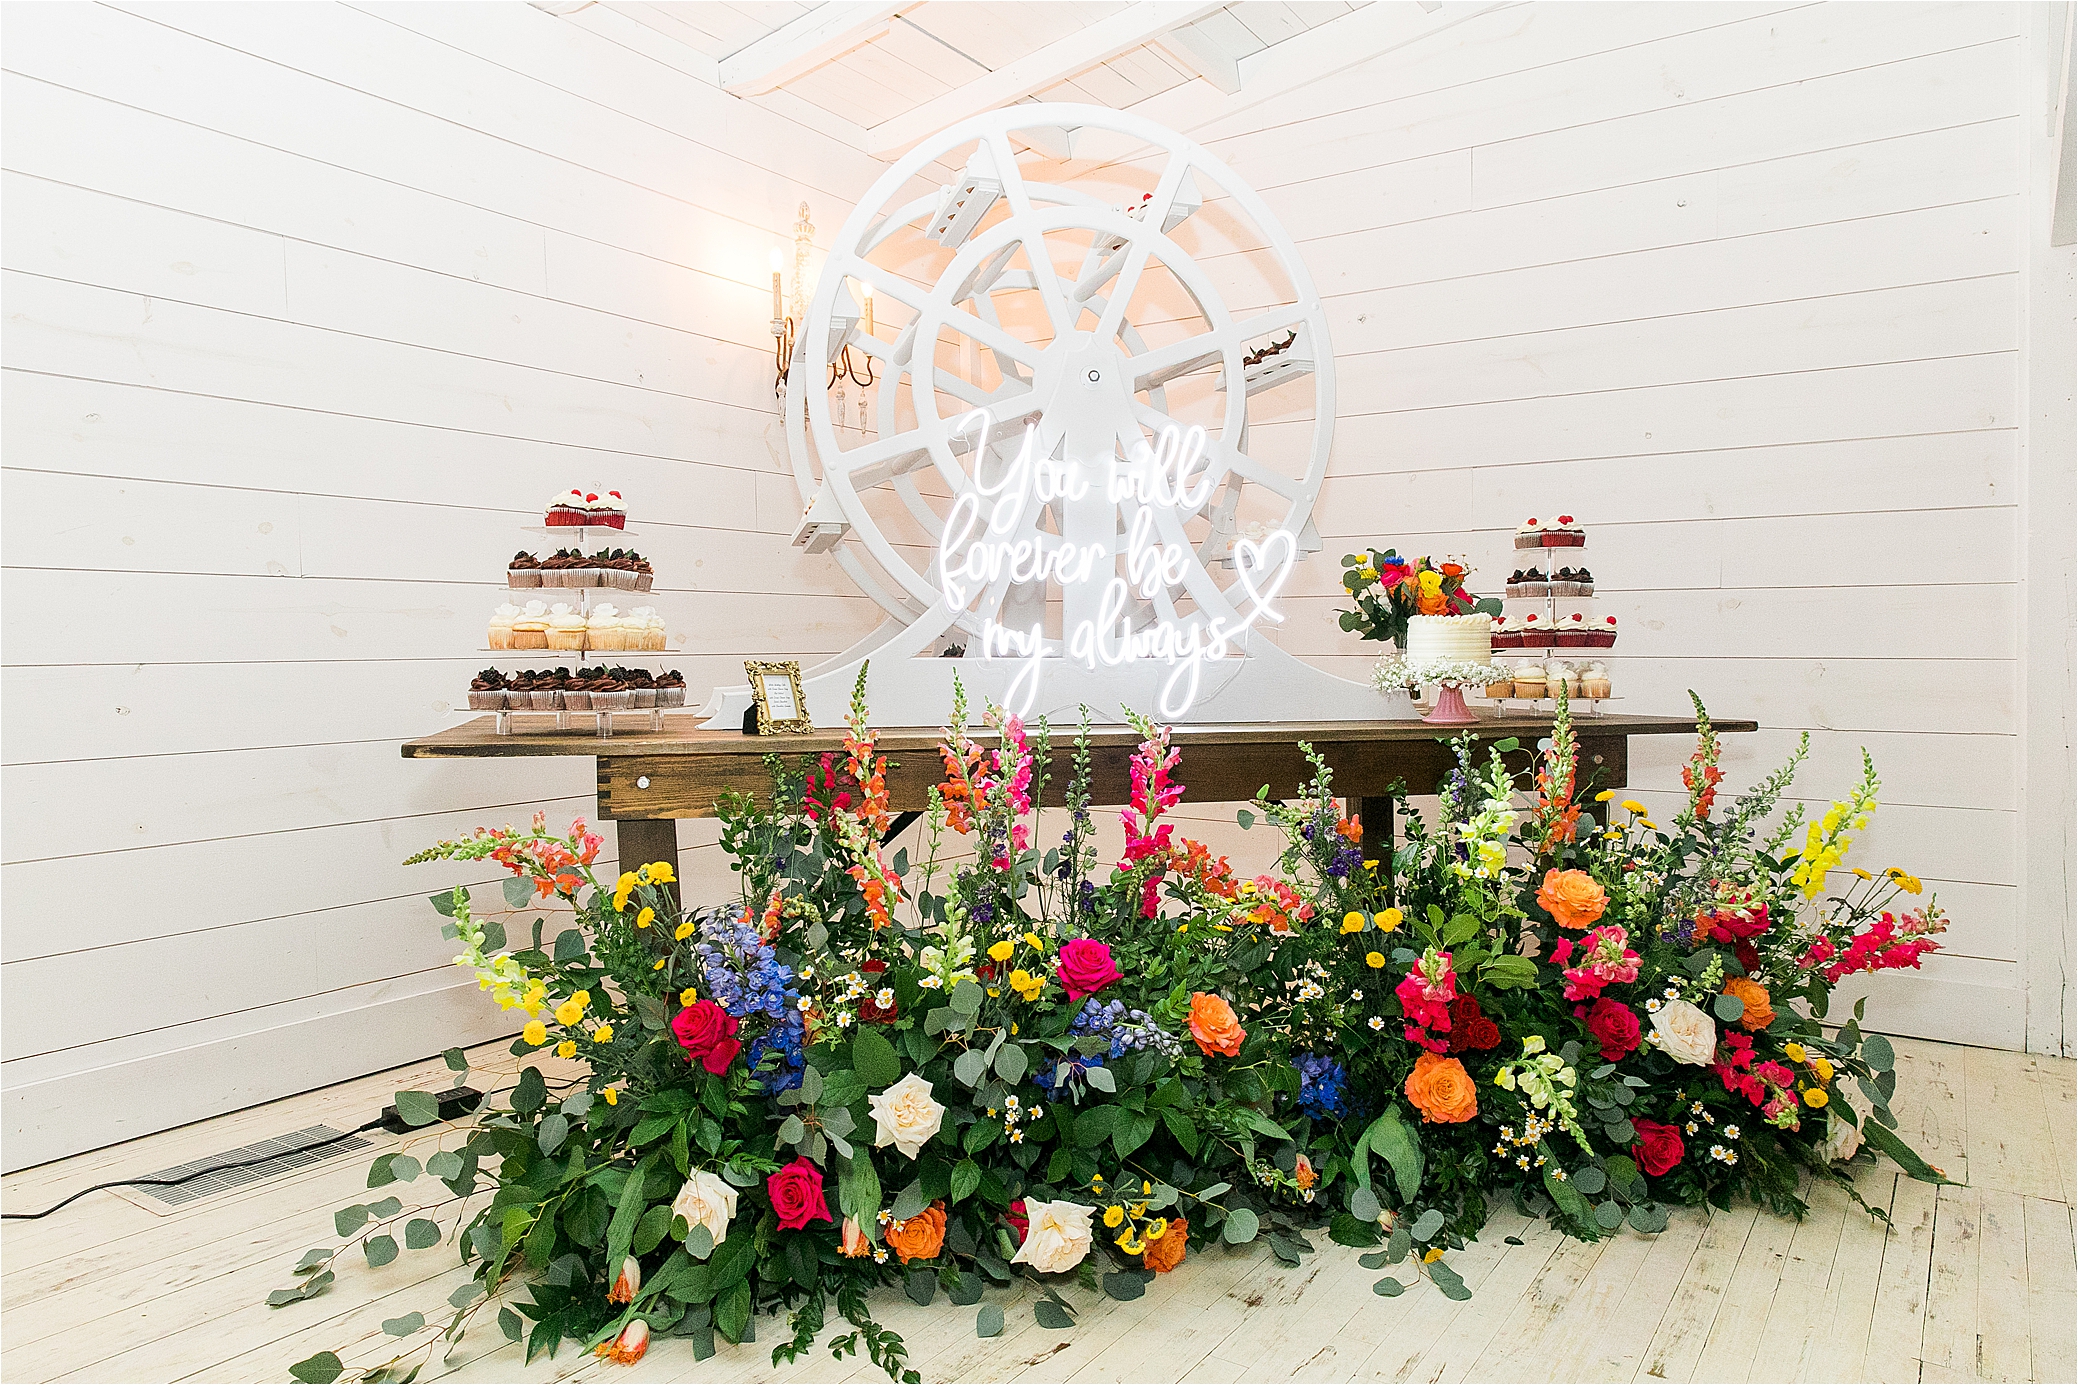 A ferris wheel cake display, a neon sign and colorful flowers around cupcakes and wedding cake 